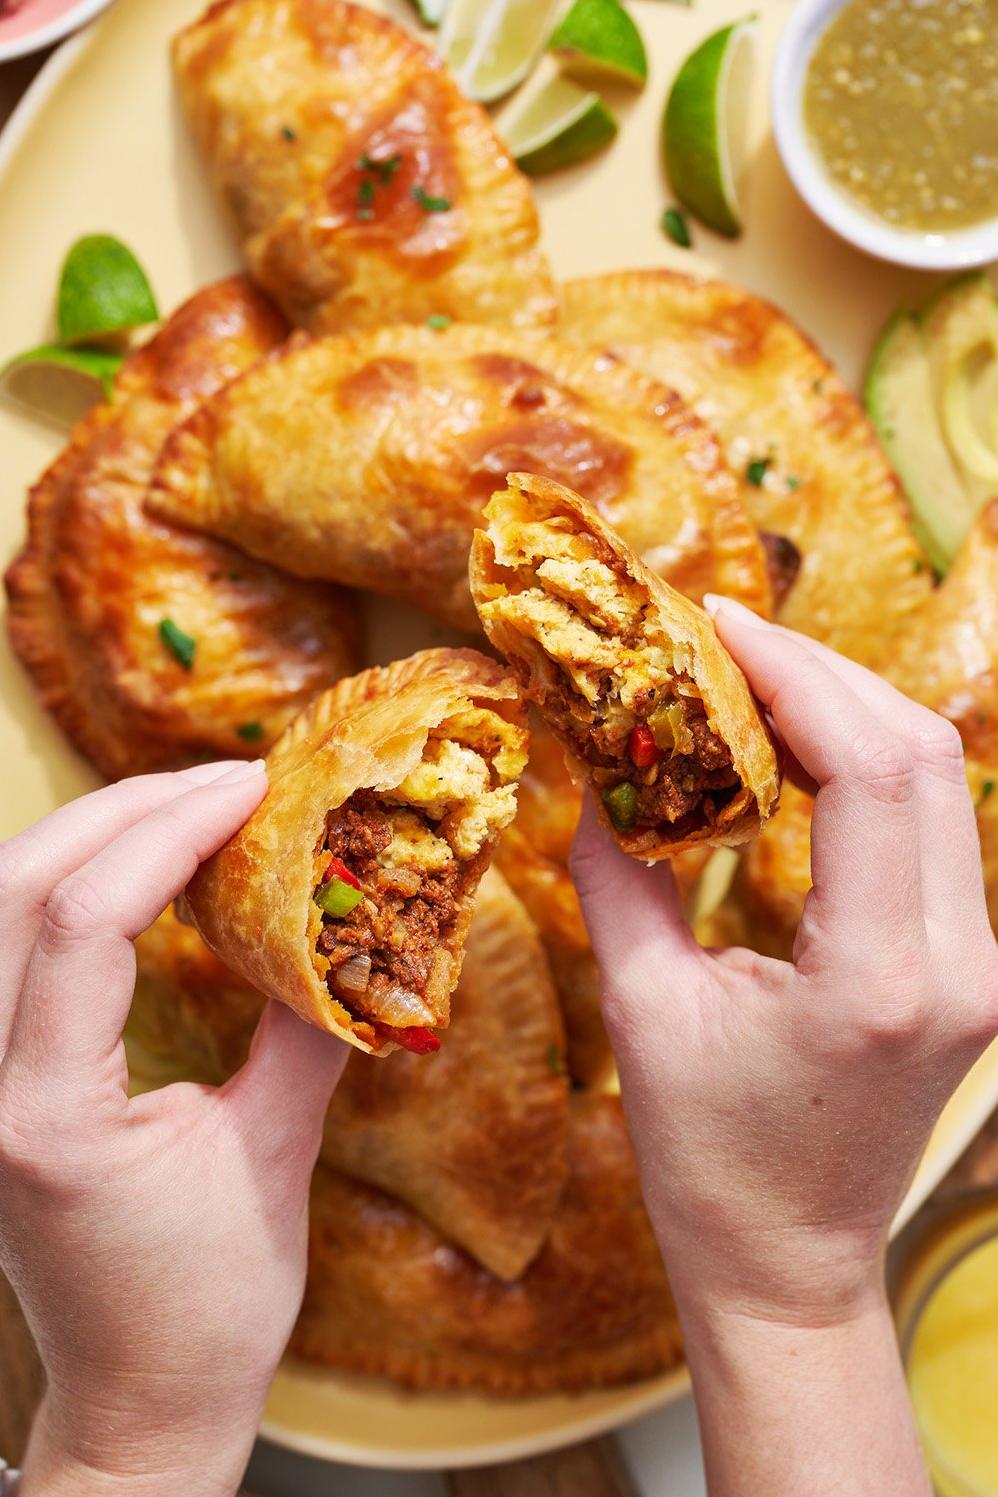  Filling and satisfying breakfast bites in the form of empanadas